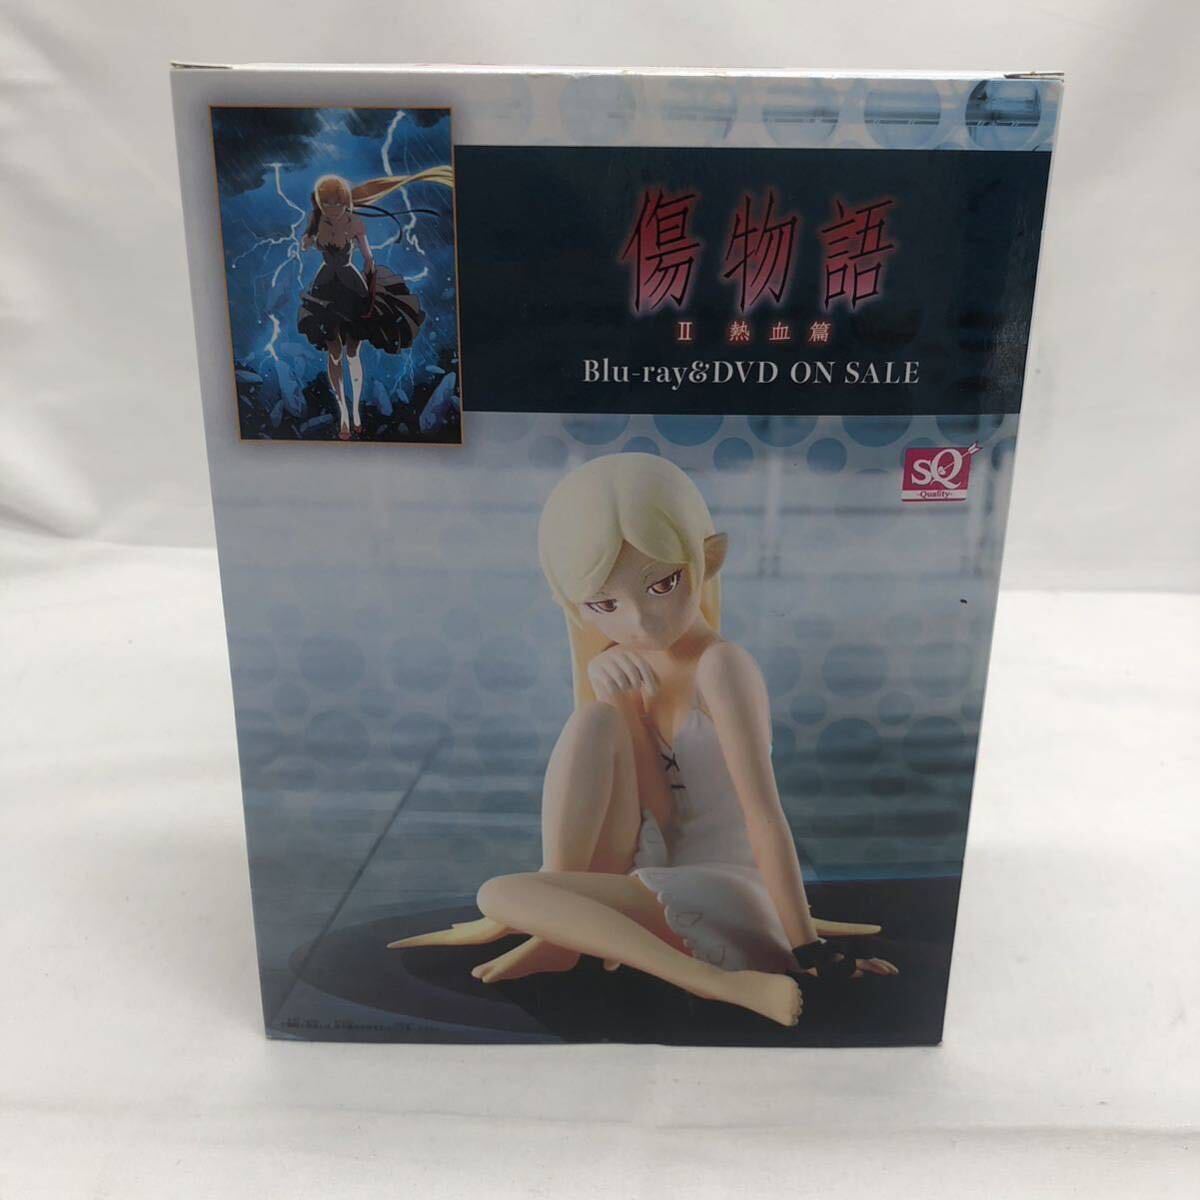  higashi person Project. beauty . dream figure 1 point . etc. minute. bride pass case 1 point IDOLM@STER CD1 point scratch monogatari figure 1 point together 4 point used YS 8BOG